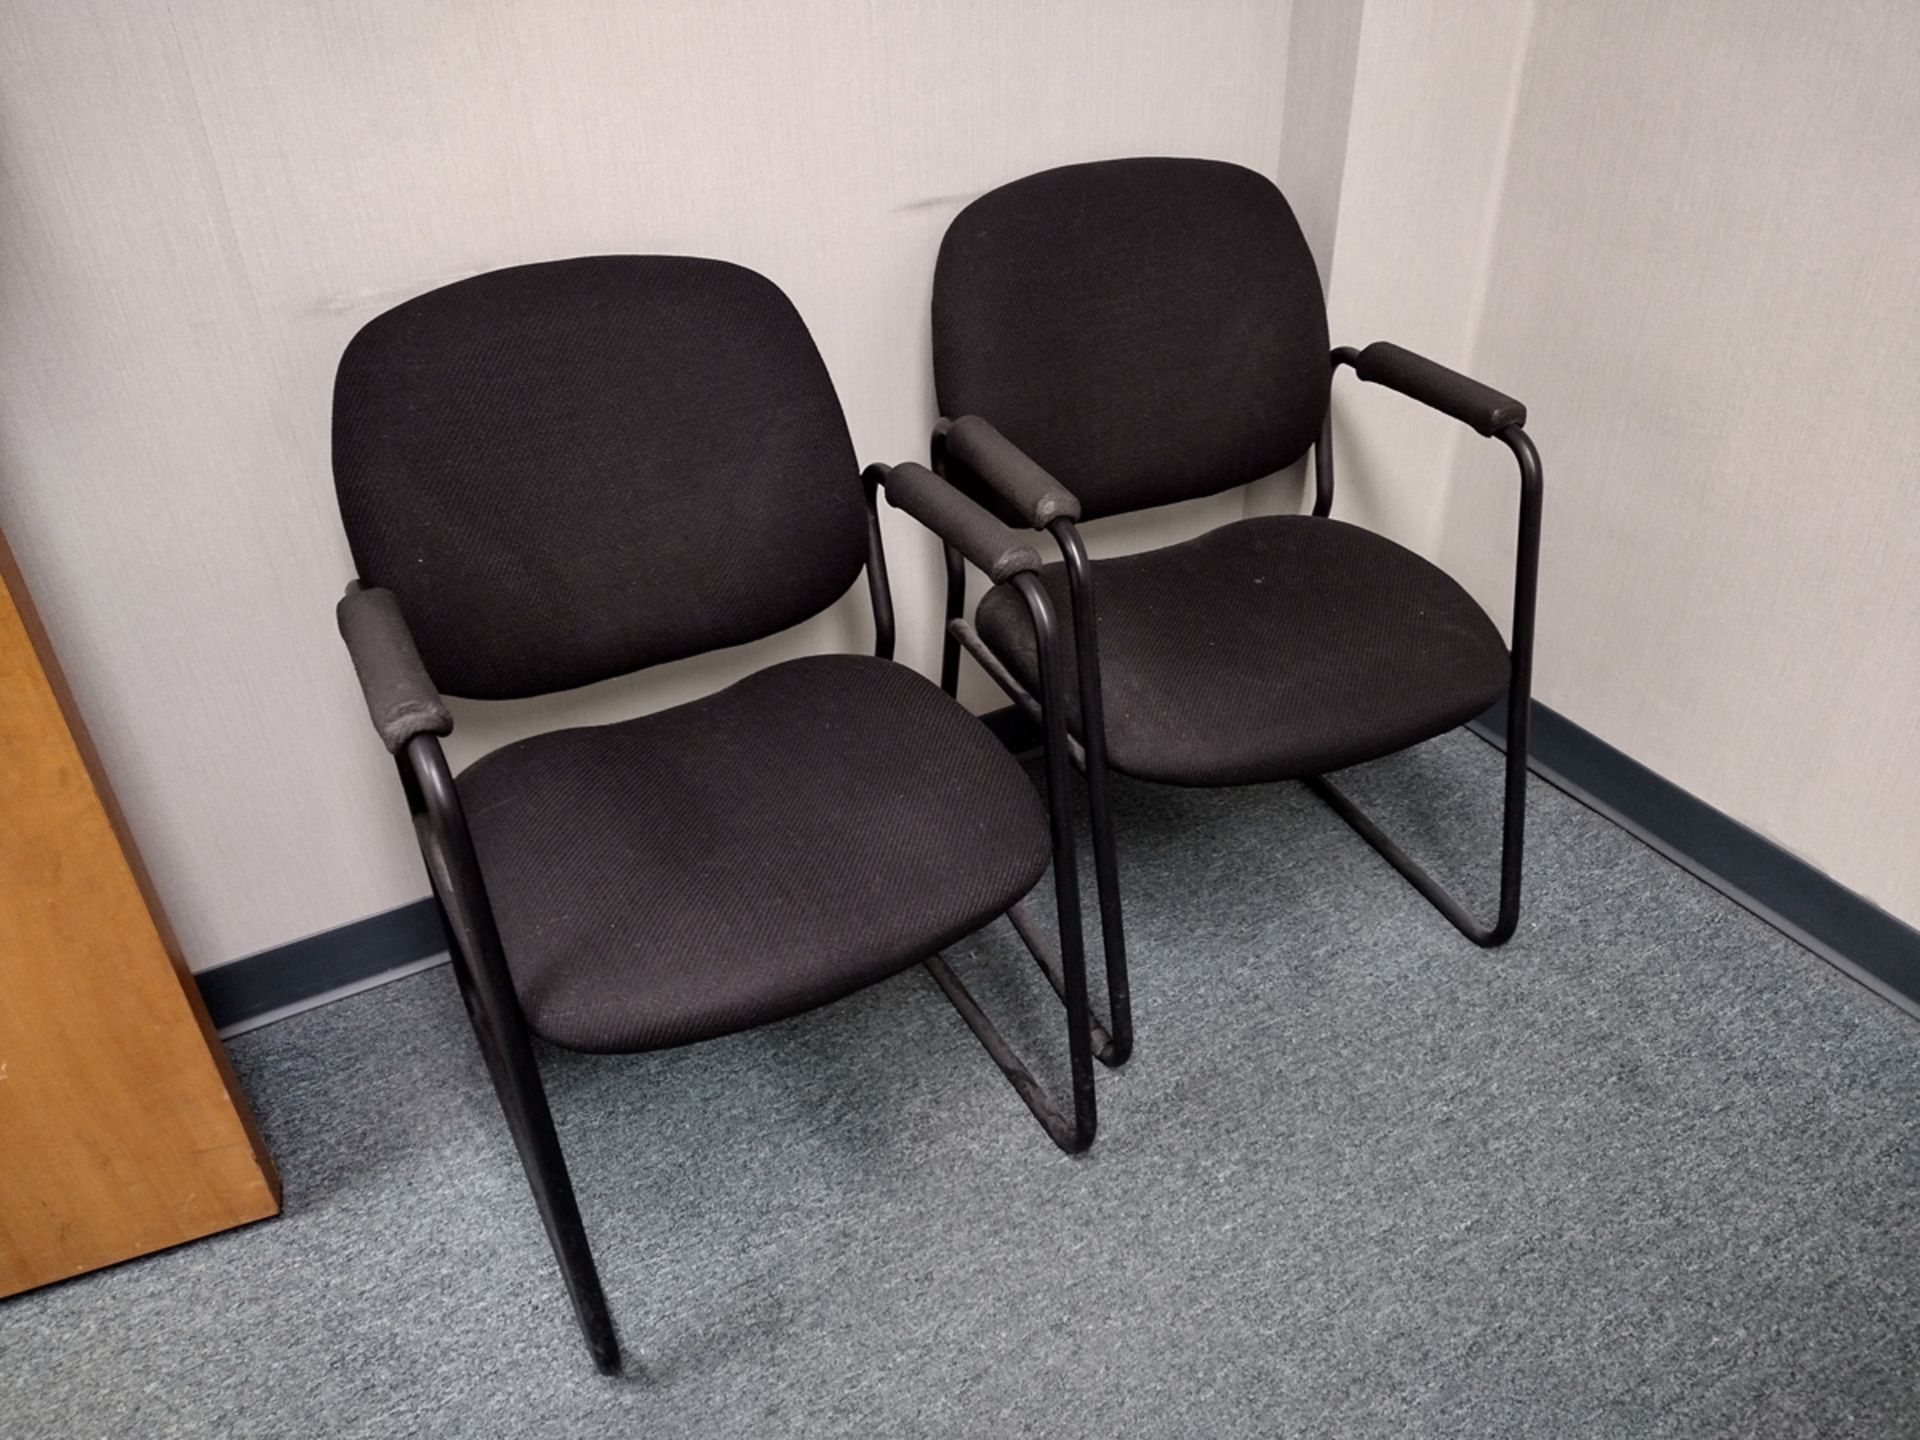 Group of Office Furniture Throughout Rooms - Image 11 of 17